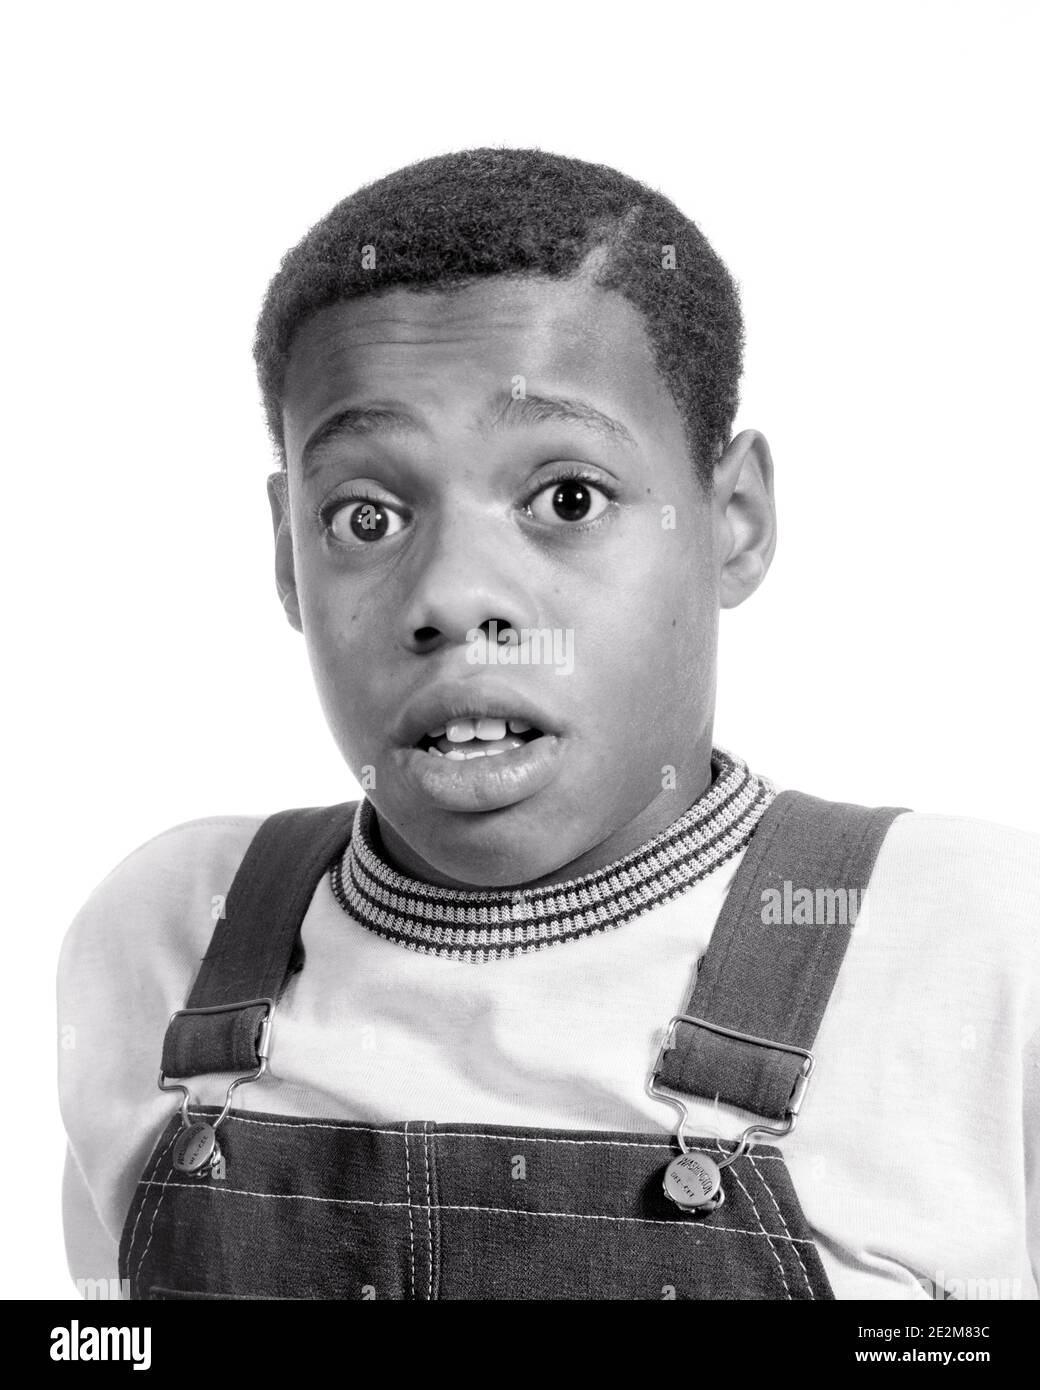 1970s SURPRISED FACIAL EXPRESSION AFRICAN-AMERICAN PRE-TEEN BOY WEARING T-SHIRT BIB OVERHAULS WIDE-EYED LOOKING AT CAMERA - b25647 HAR001 HARS EXPRESSIONS B&W EYE CONTACT BUG-EYED HEAD AND SHOULDERS DISCOVERY AFRICAN-AMERICANS AFRICAN-AMERICAN EXCITEMENT BLACK ETHNICITY CONCEPTUAL TEENAGED T-SHIRT WIDE-EYED BIB PRE-TEEN PRE-TEEN BOY STARTLED BLACK AND WHITE HAR001 OLD FASHIONED AFRICAN AMERICANS Stock Photo